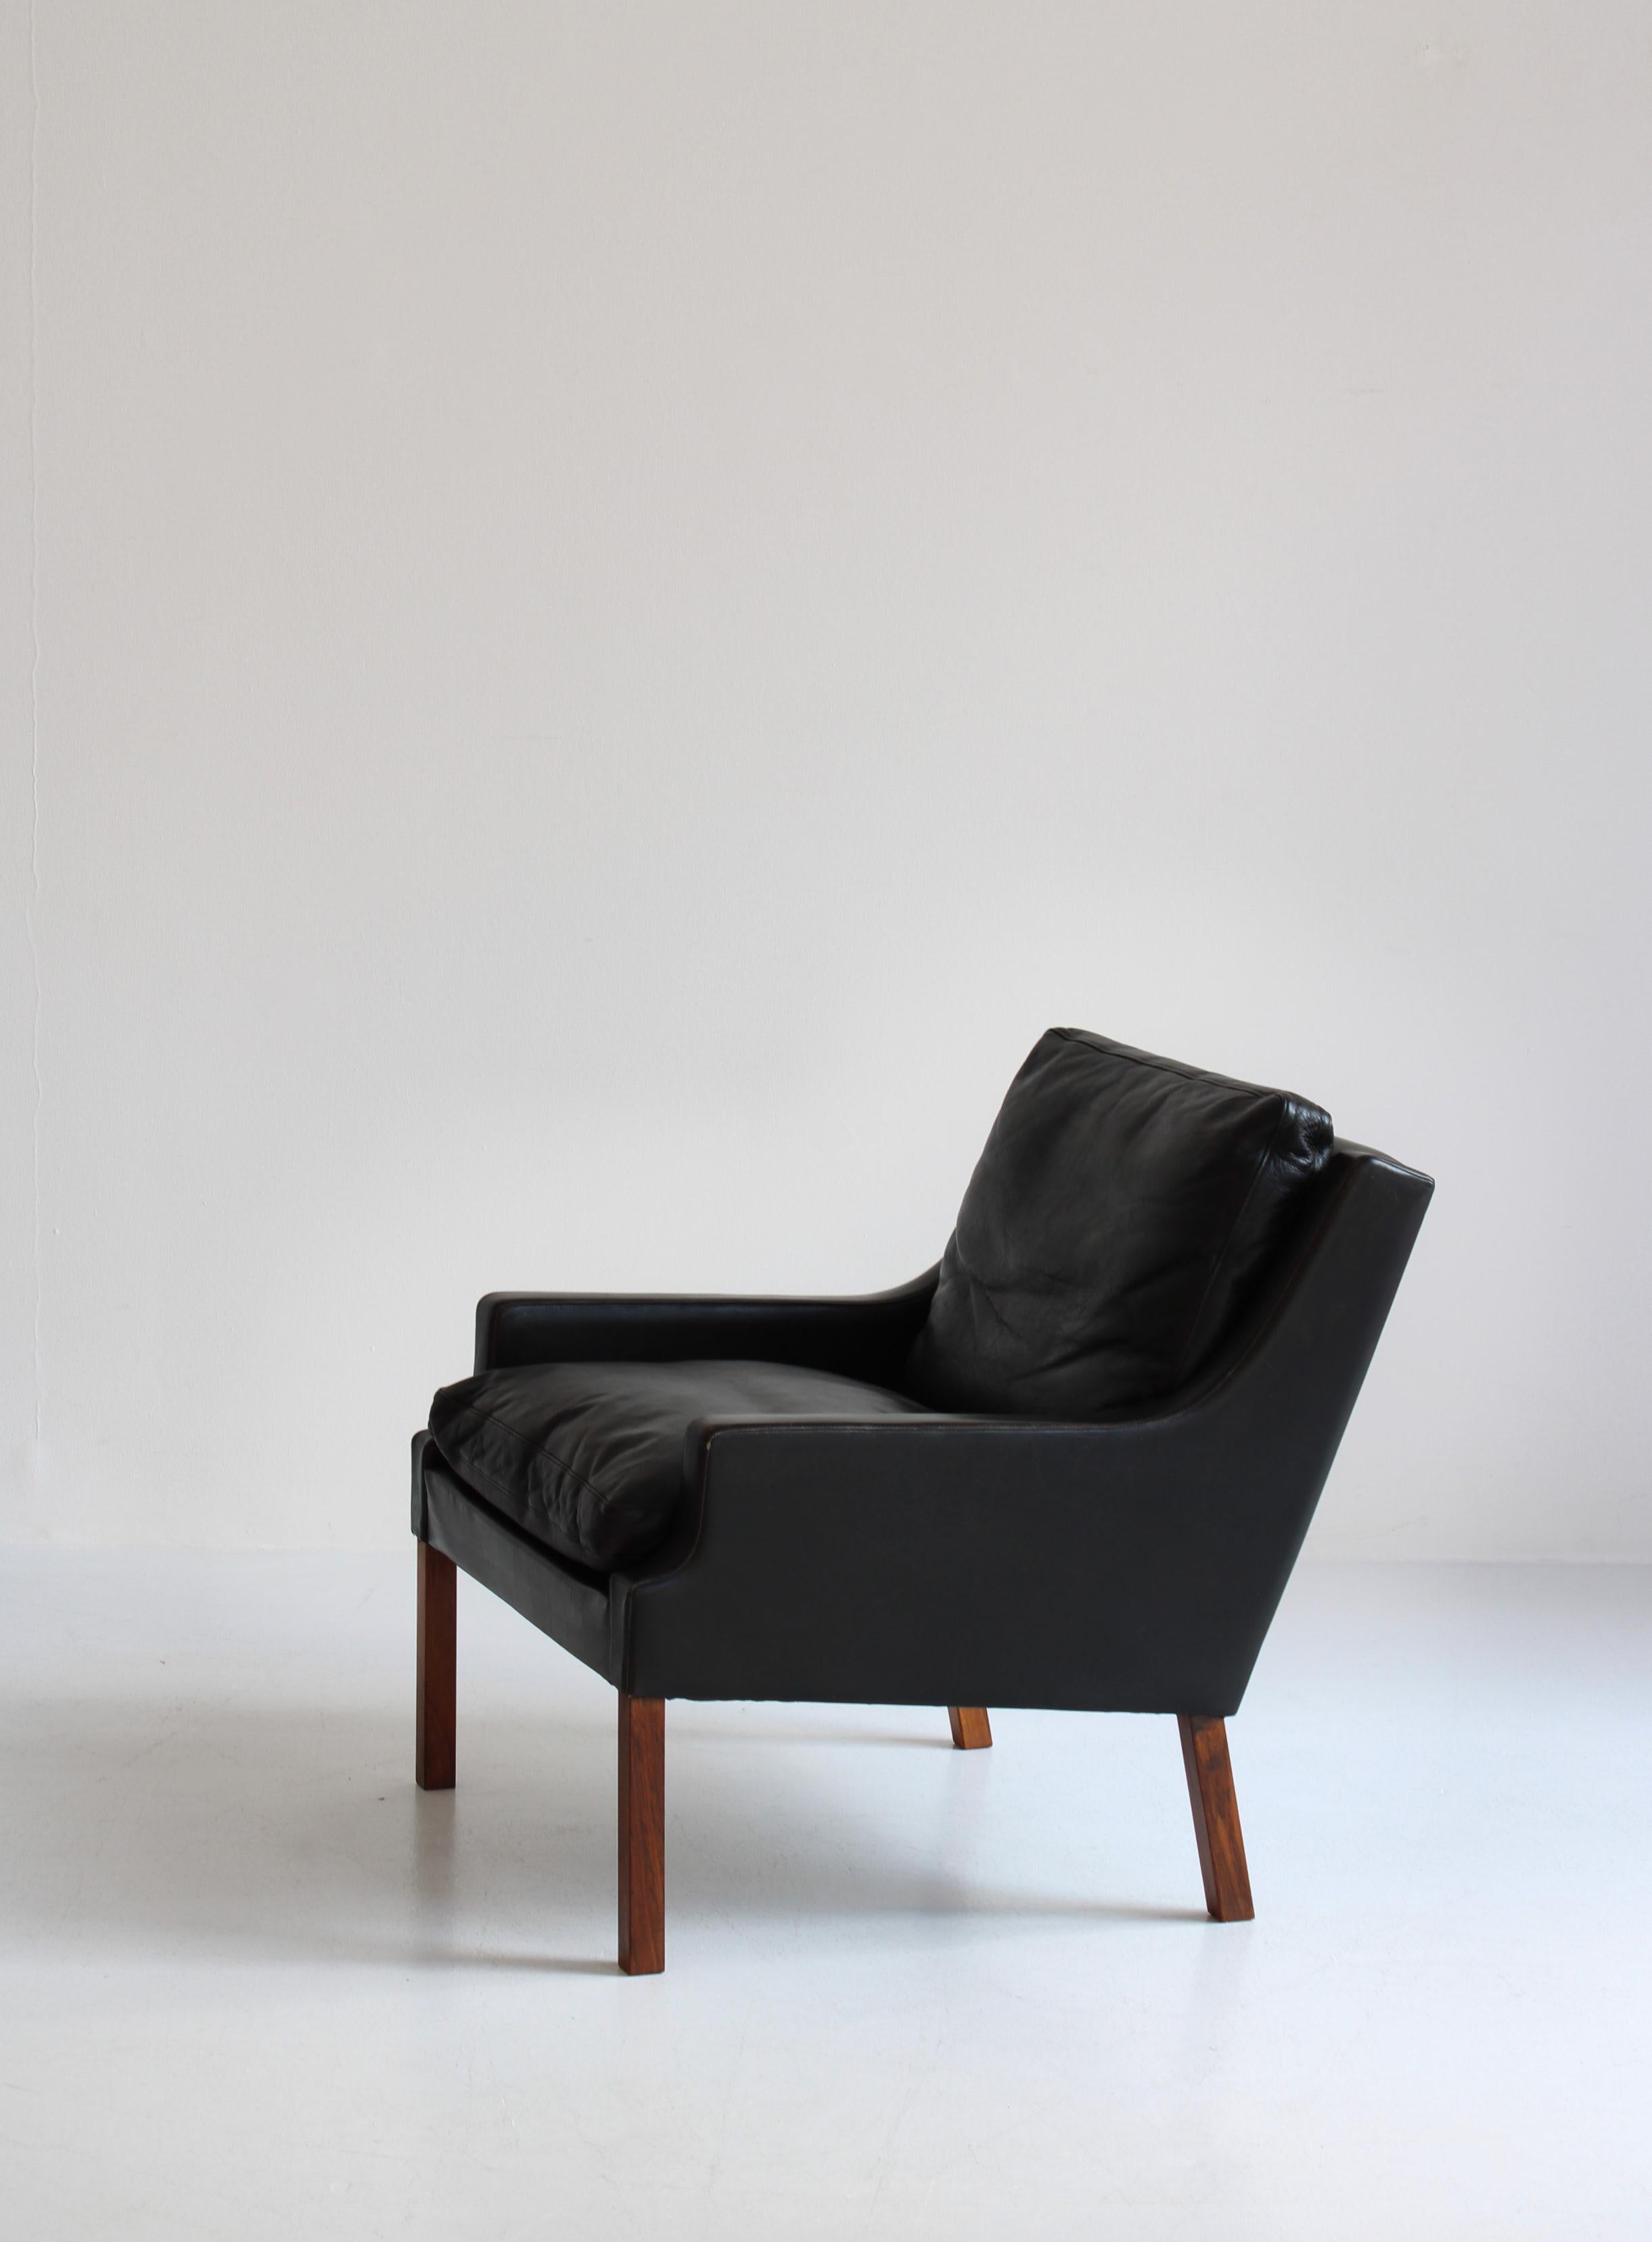 Set of Danish Modern Lounge Chairs in Black Leather by Rud Thygesen, 1966 2